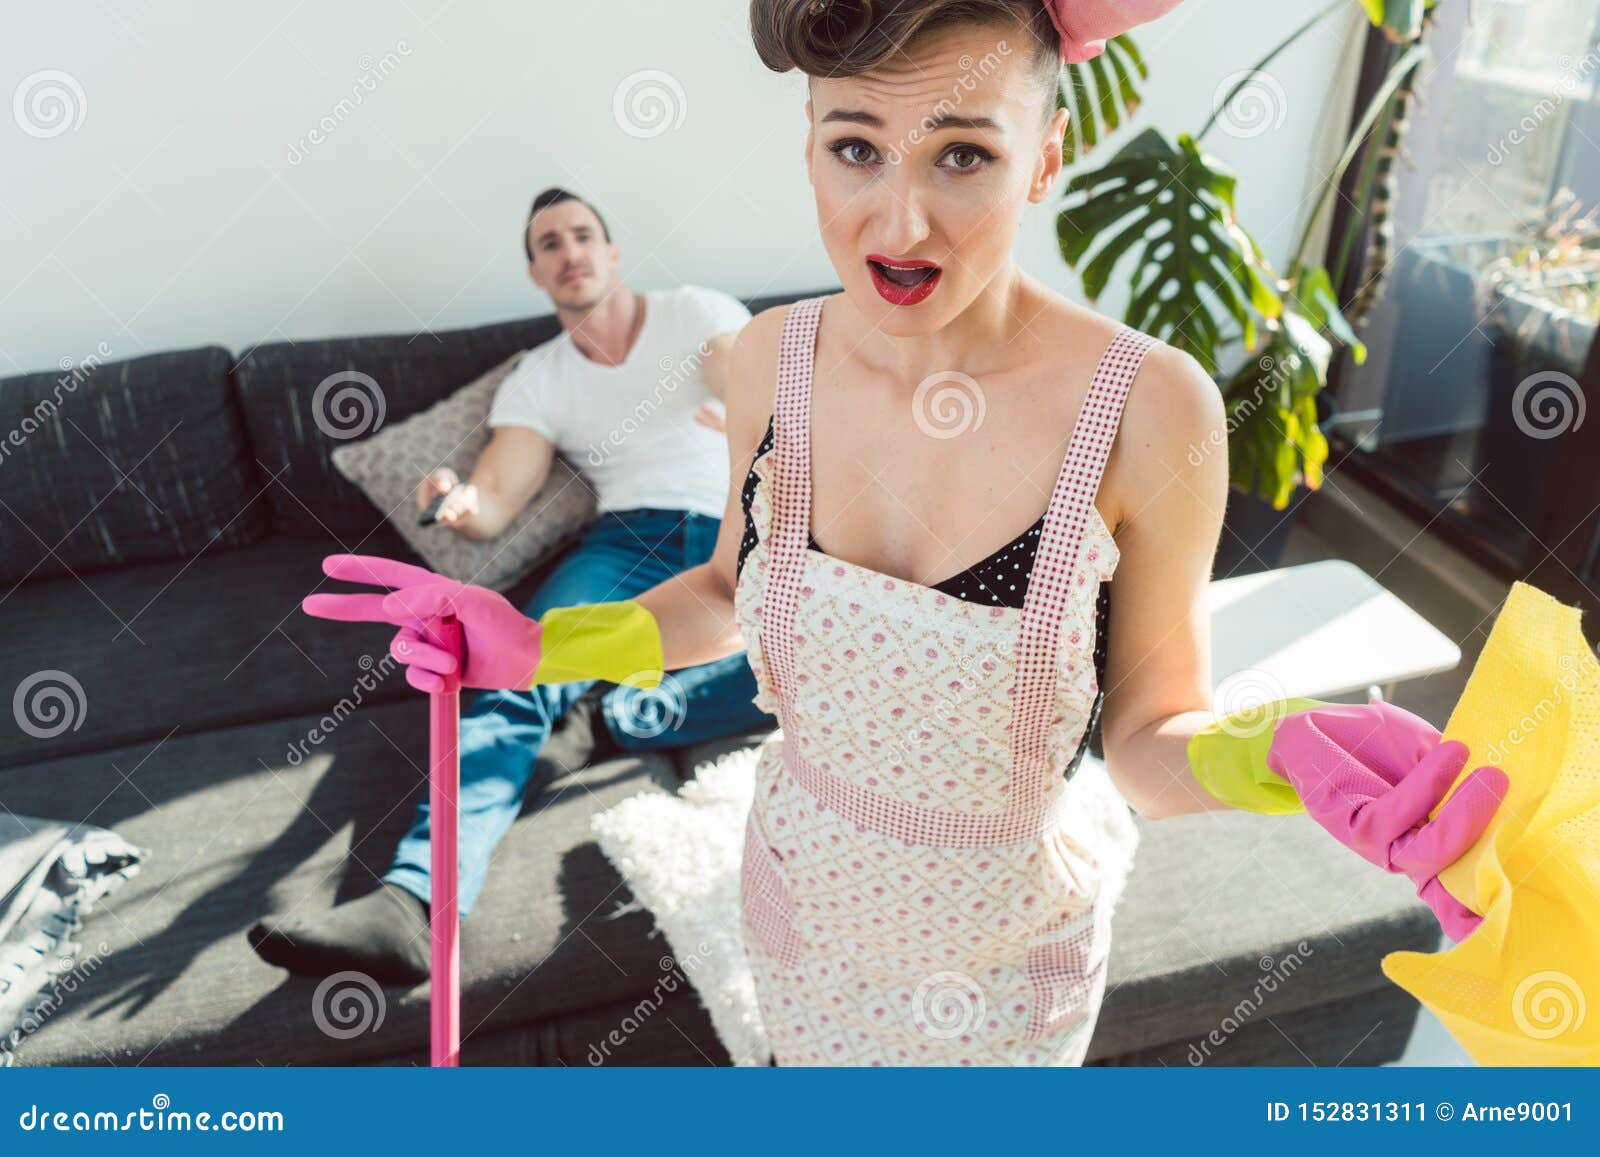 Wife Is Mad At Her Lazy Husband Who Is Not Helping With Chores Stock Image Image Of Housework